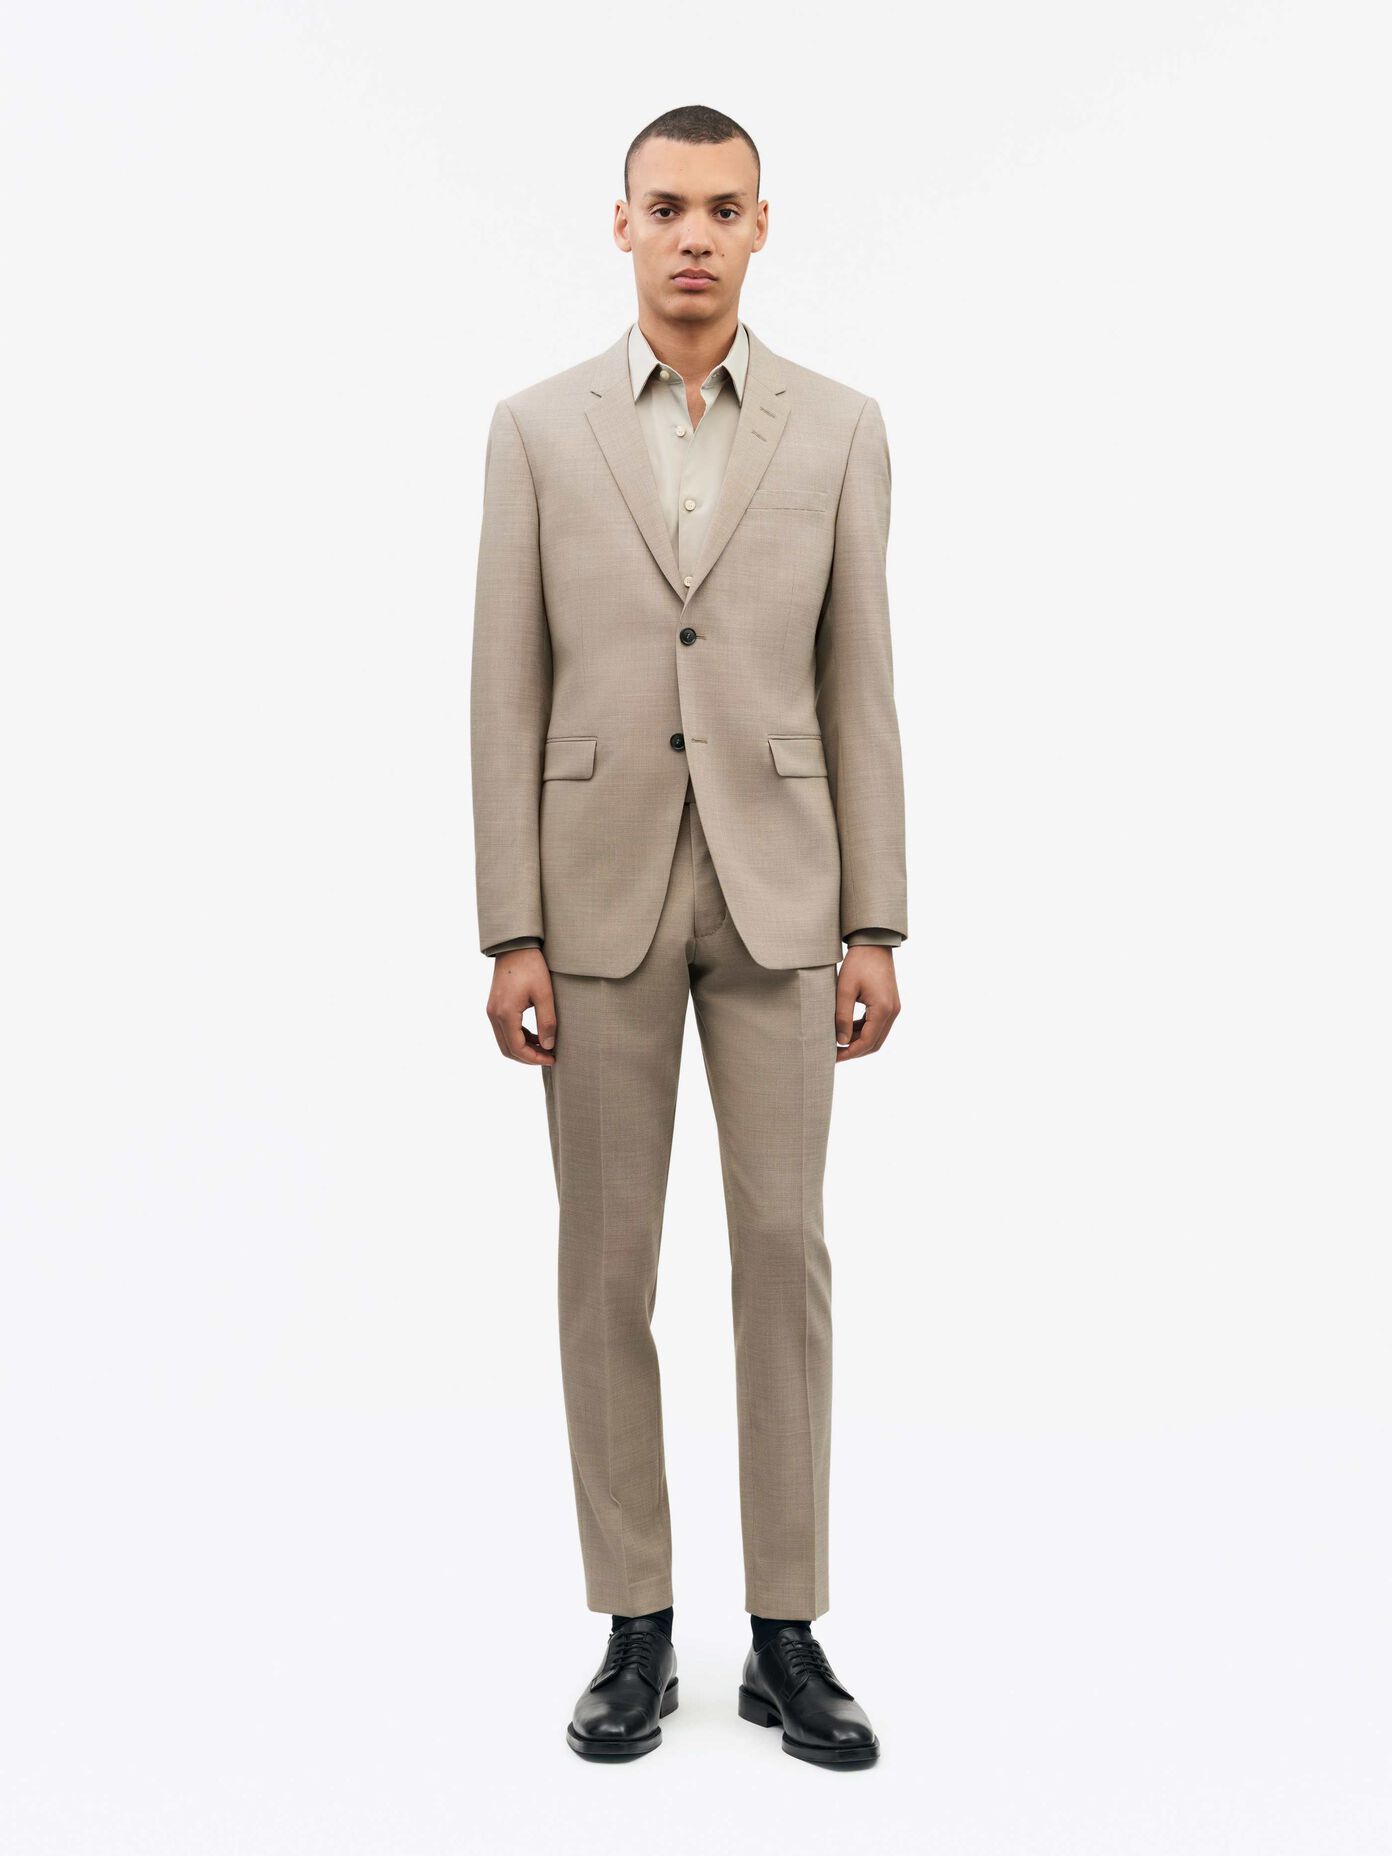 Find the Perfect Wedding Suit | Tiger of Sweden